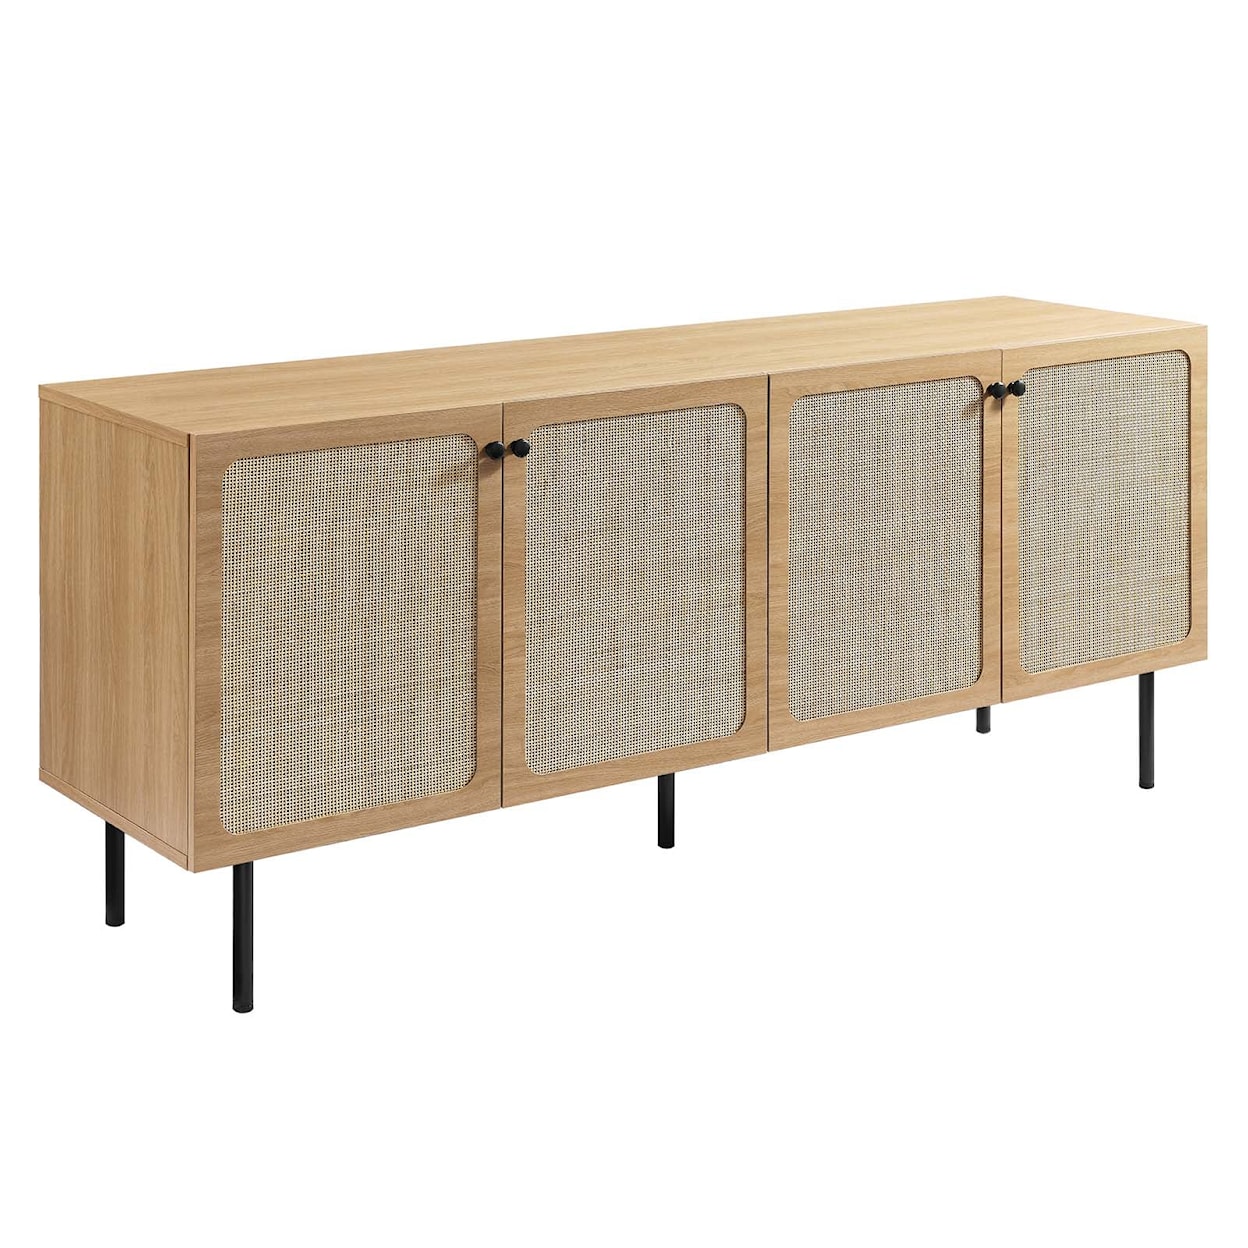 Modway Chaucer Sideboard